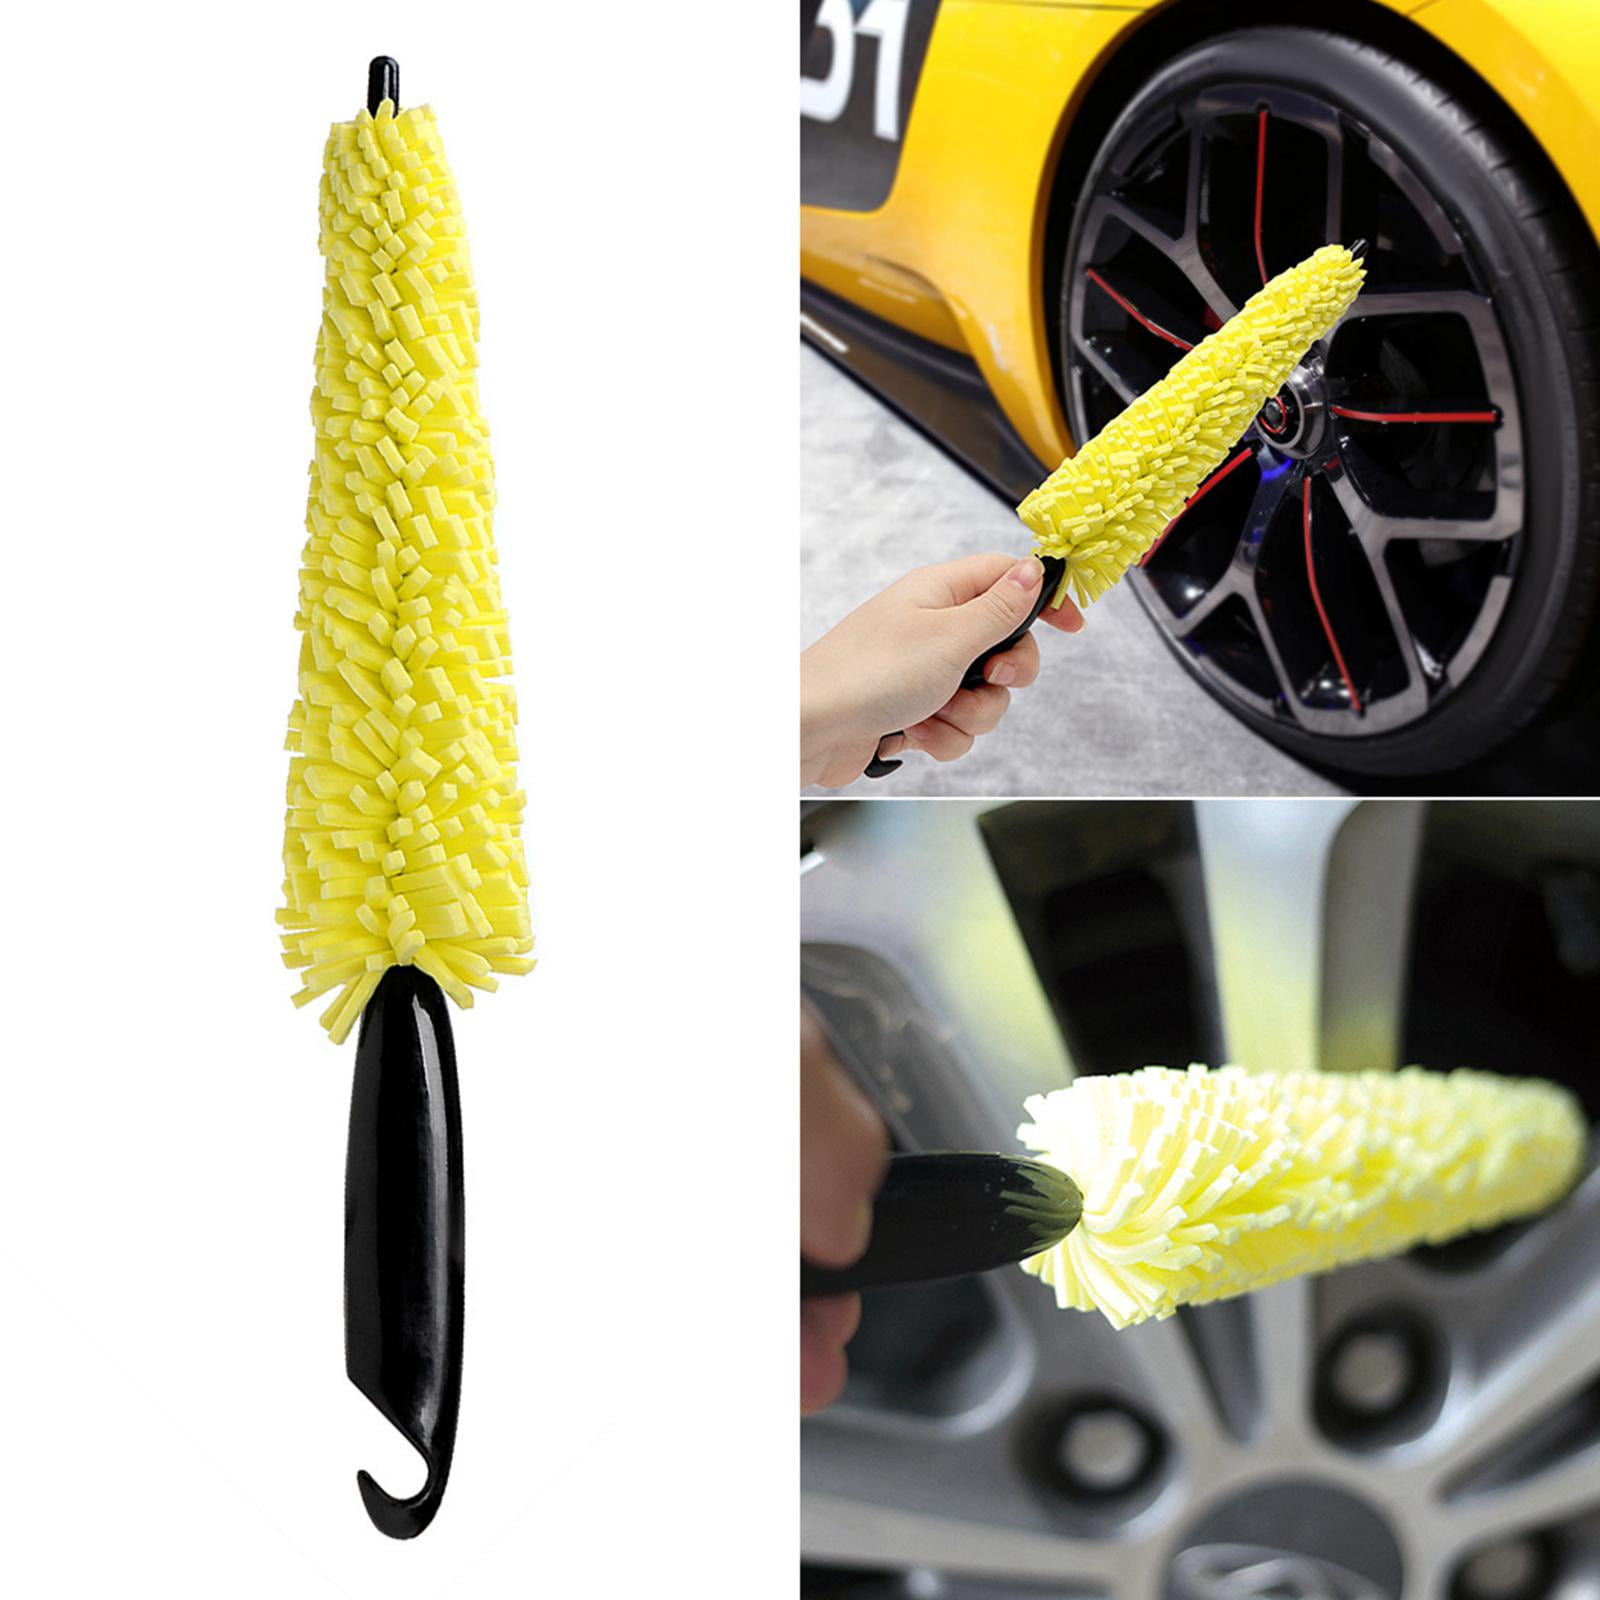 Motorcycle - Car Cleaning Supplies - Motorcycle Accessories - Drill Brush - Wheels - Rims - Leather - Glass - Vinyl - Spin Brush - Dirt Bike - Bike